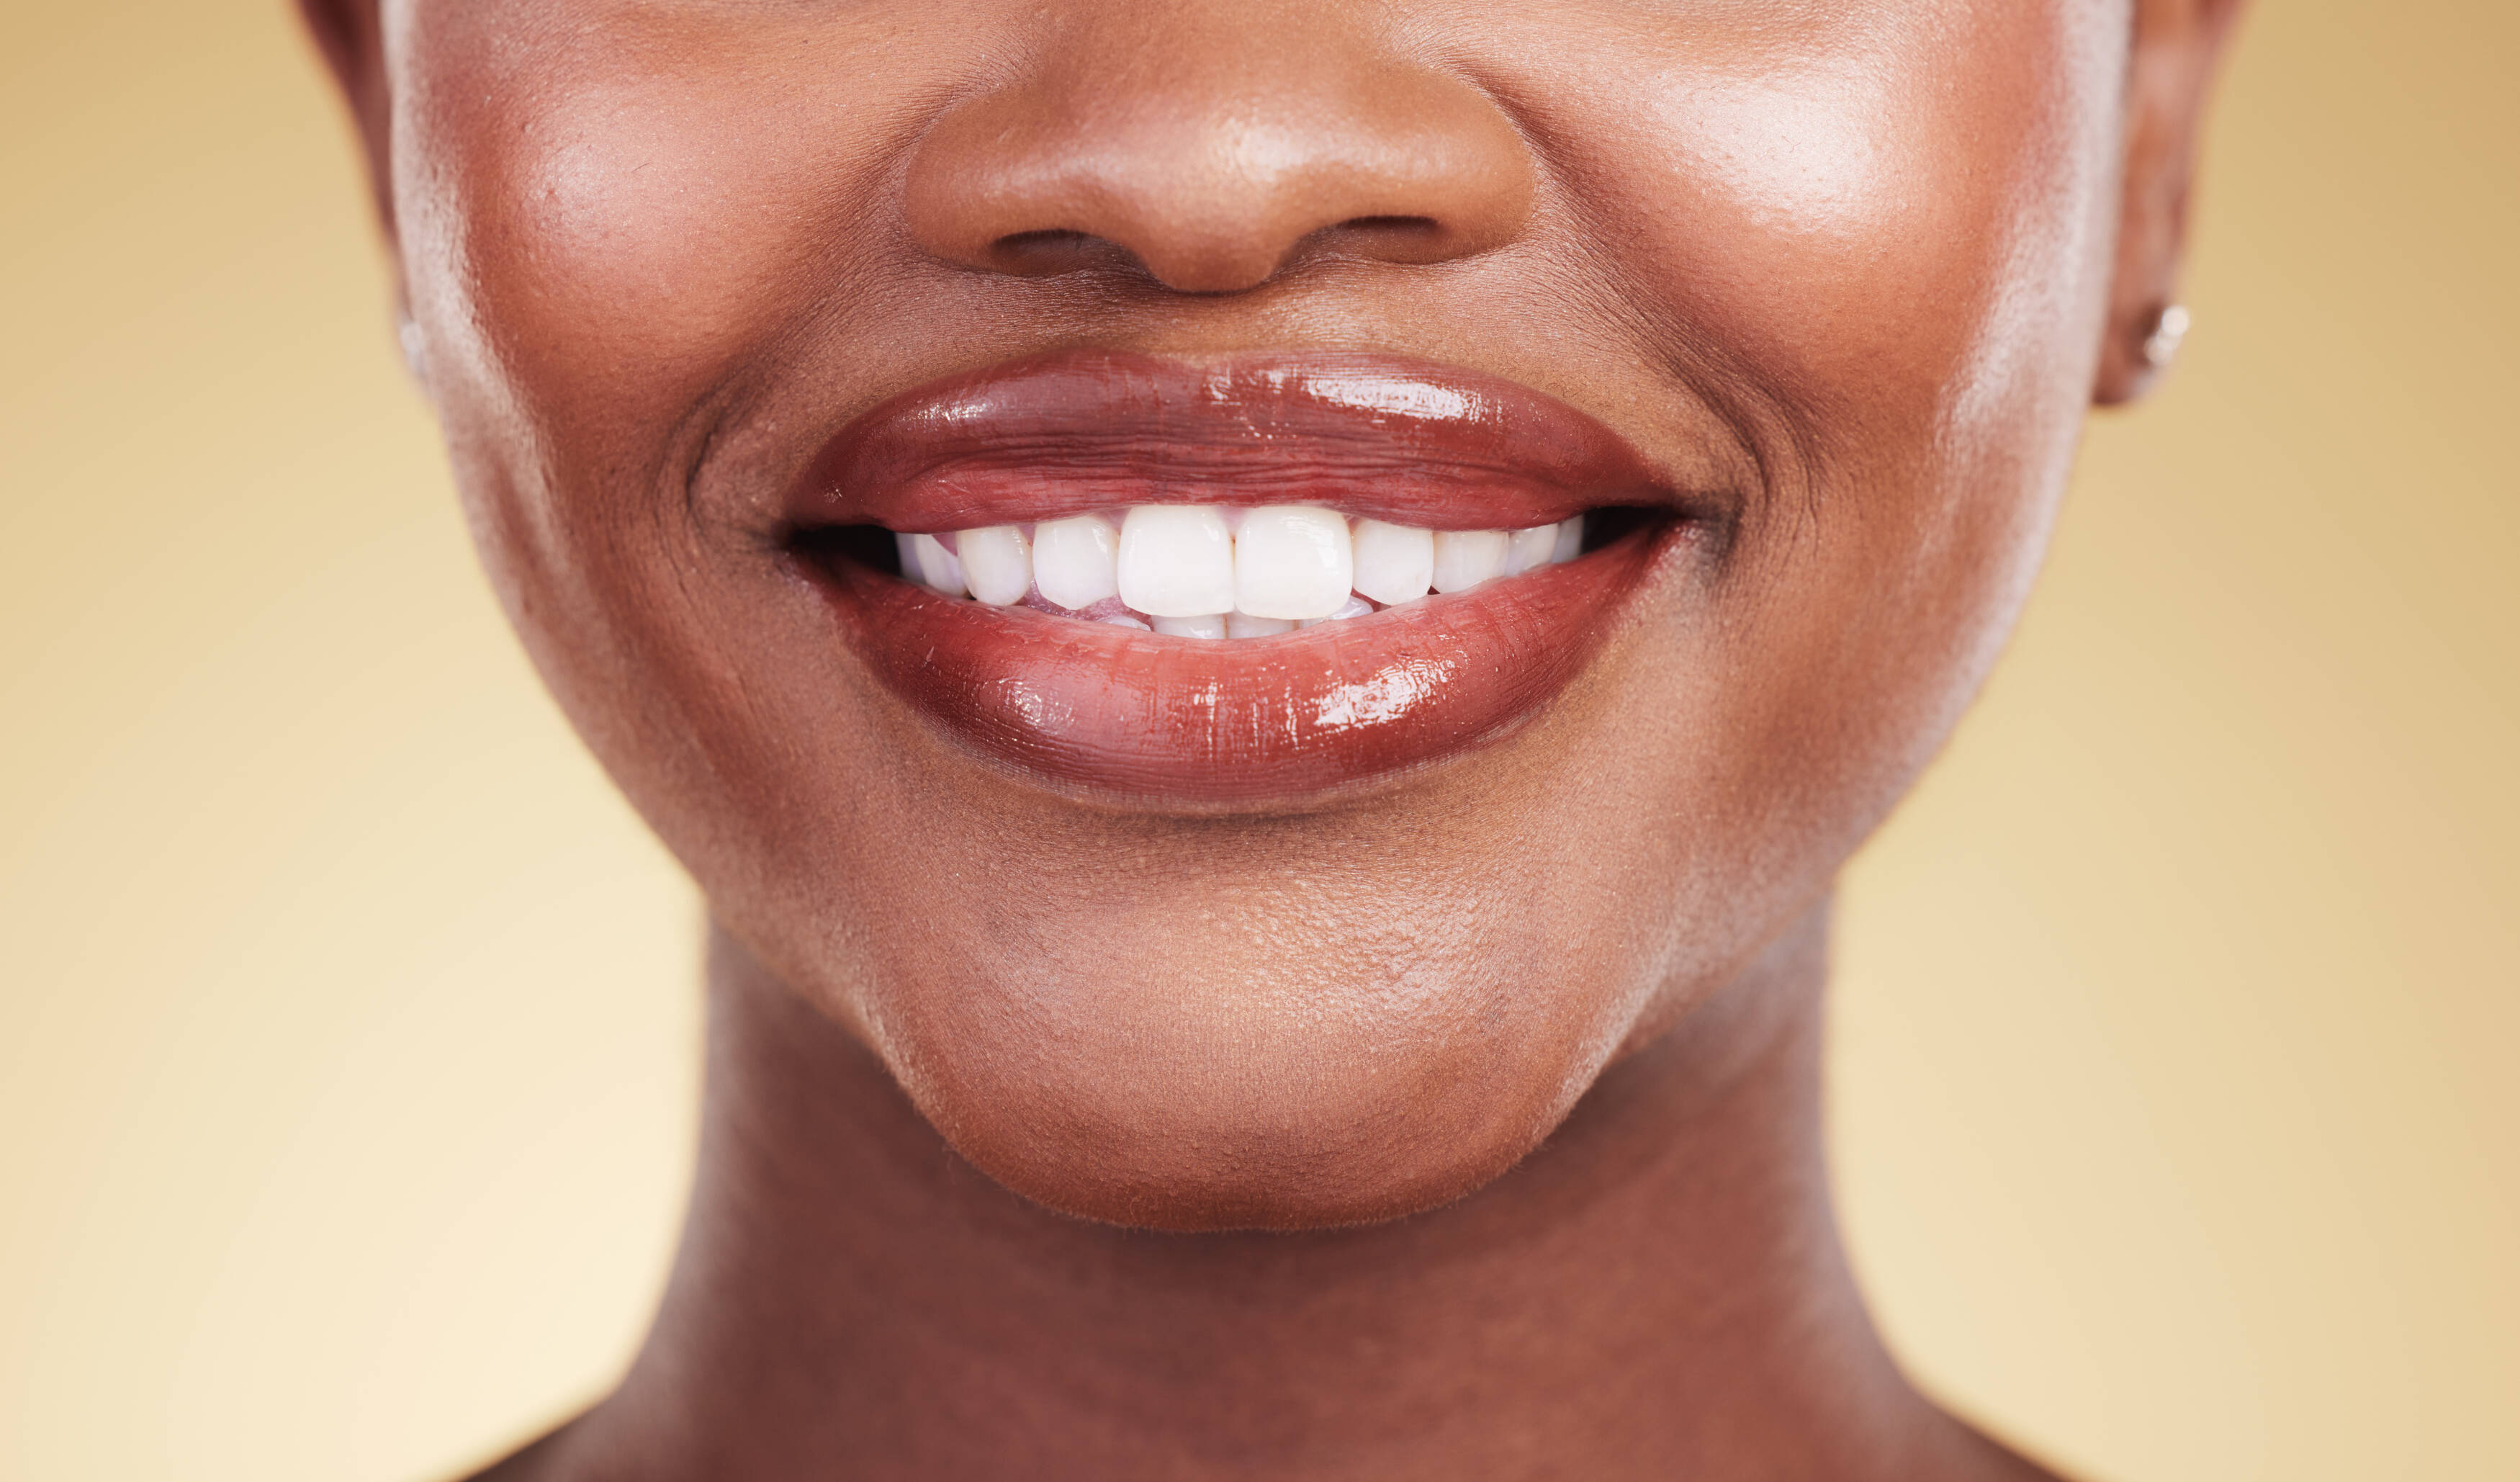 woman mouth and teeth natural beauty and dental 2023 11 27 05 03 47 utc scaled